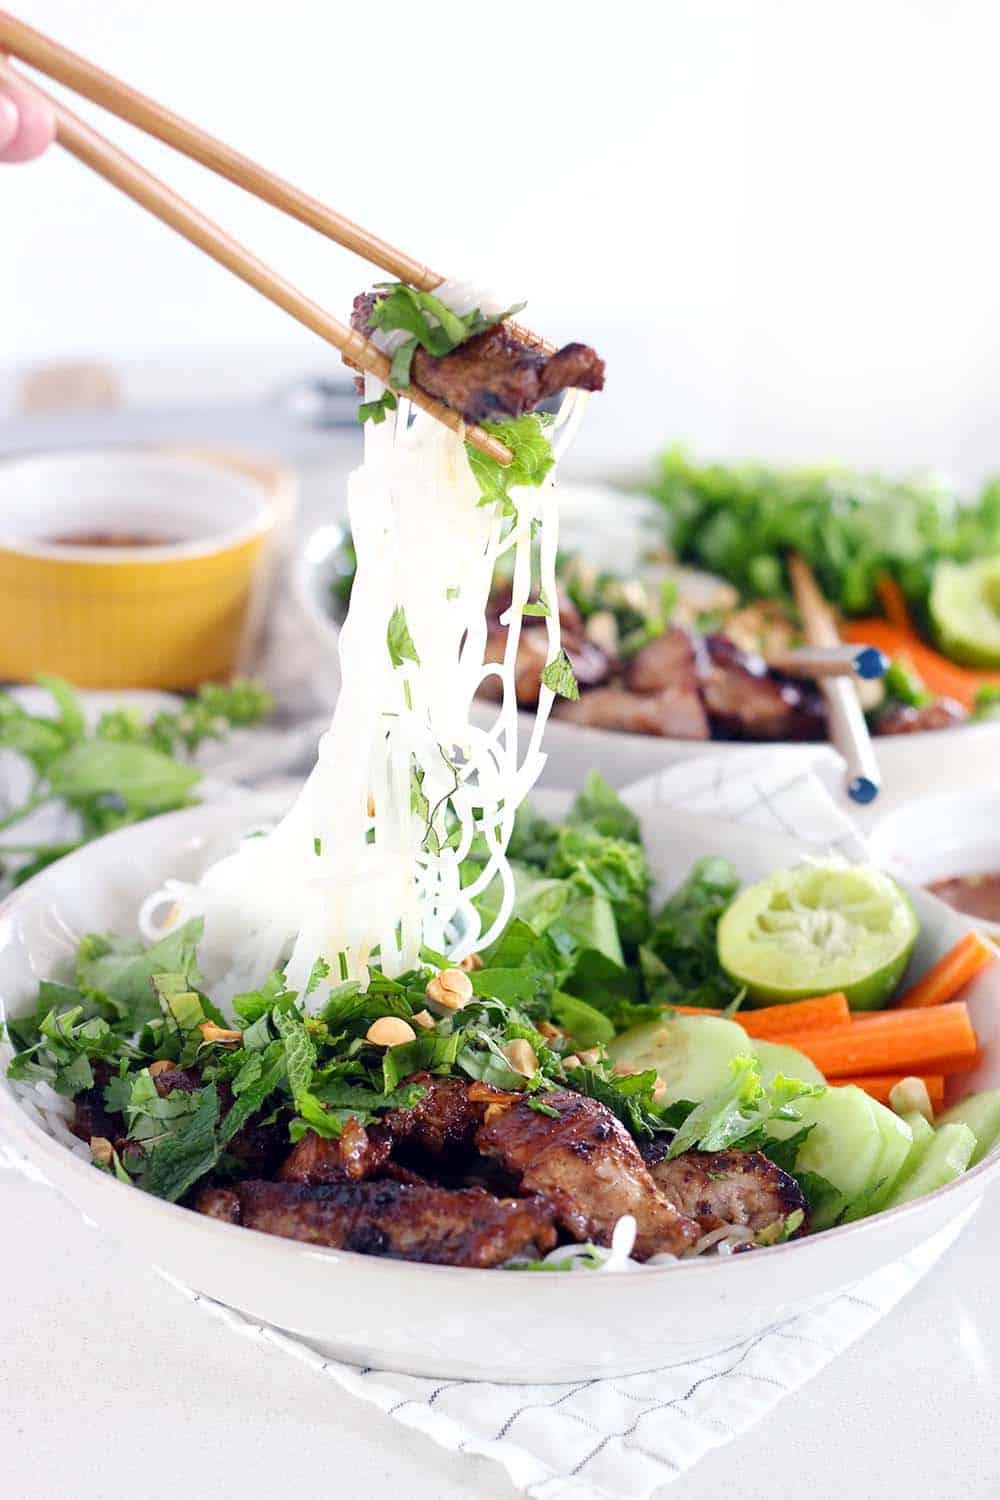 This recipe for Vietnamese Pork Bún Bowls uses a few shortcuts to make it quick and easy without sacrificing flavor. It